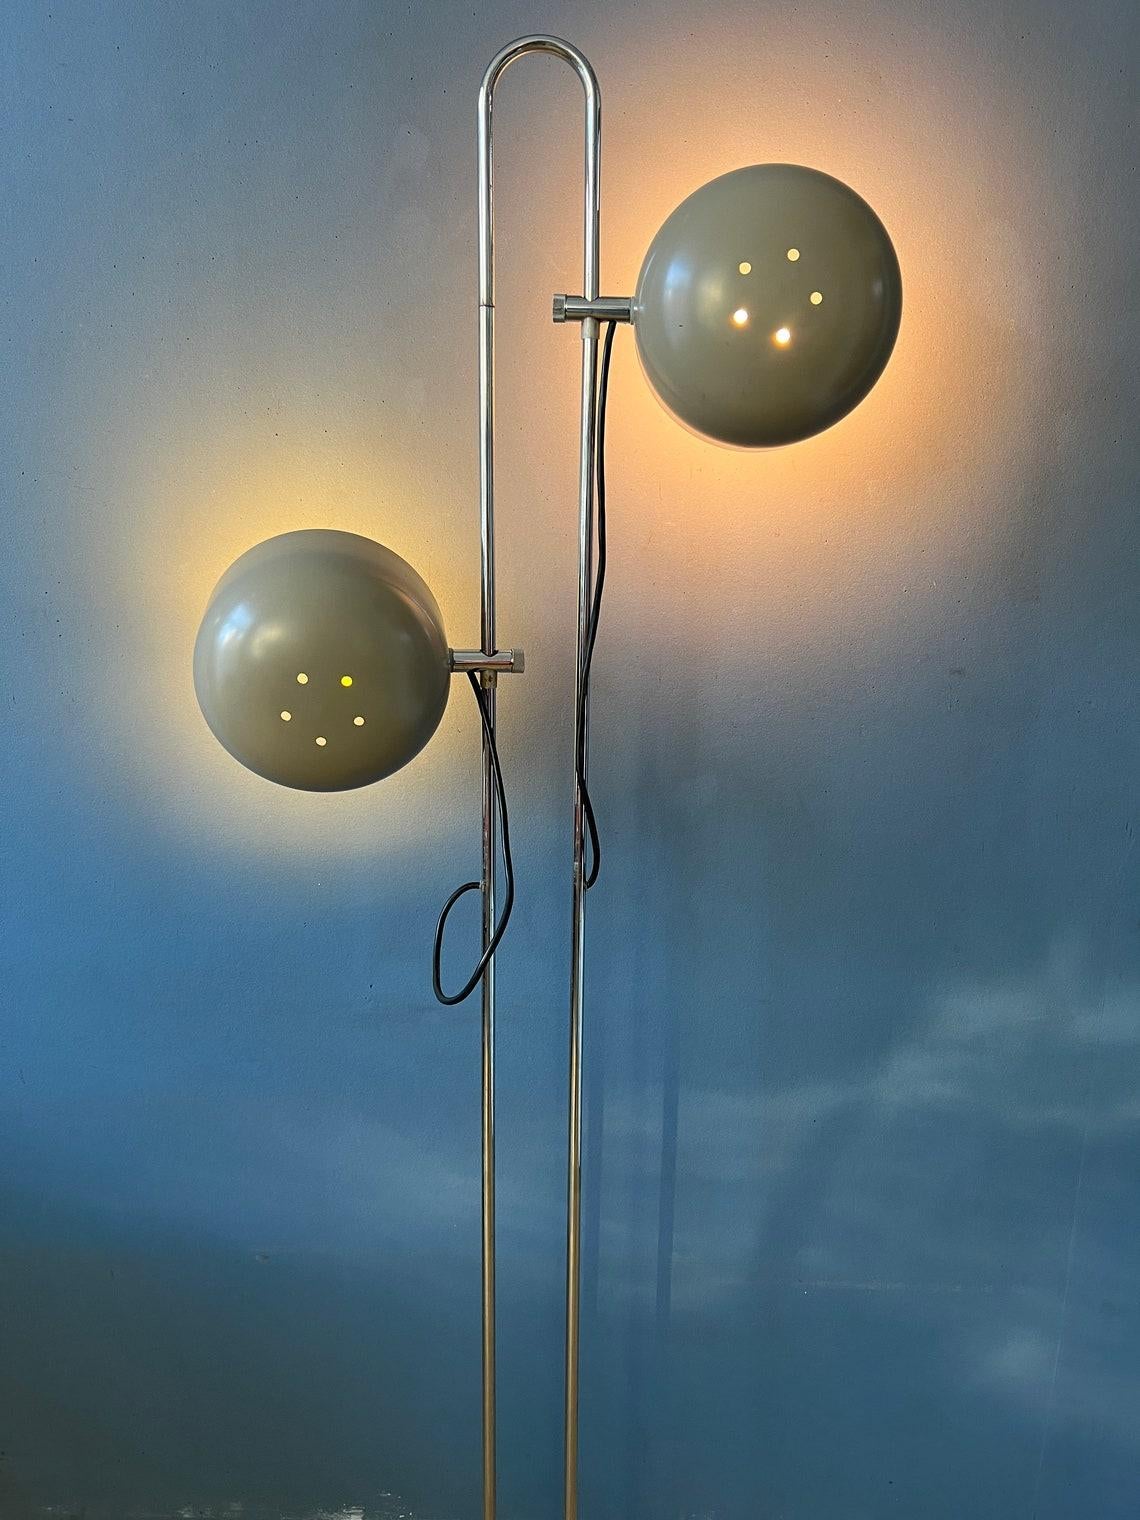 Very rare flexible taupe-like floor lamp. The shades can move up and down the pole. Also the shades itself can be adjusted. The lamp requires two E26/27 lightbulbs and currently has an EU-plug (easily used outside EU with plug-converter).
We also